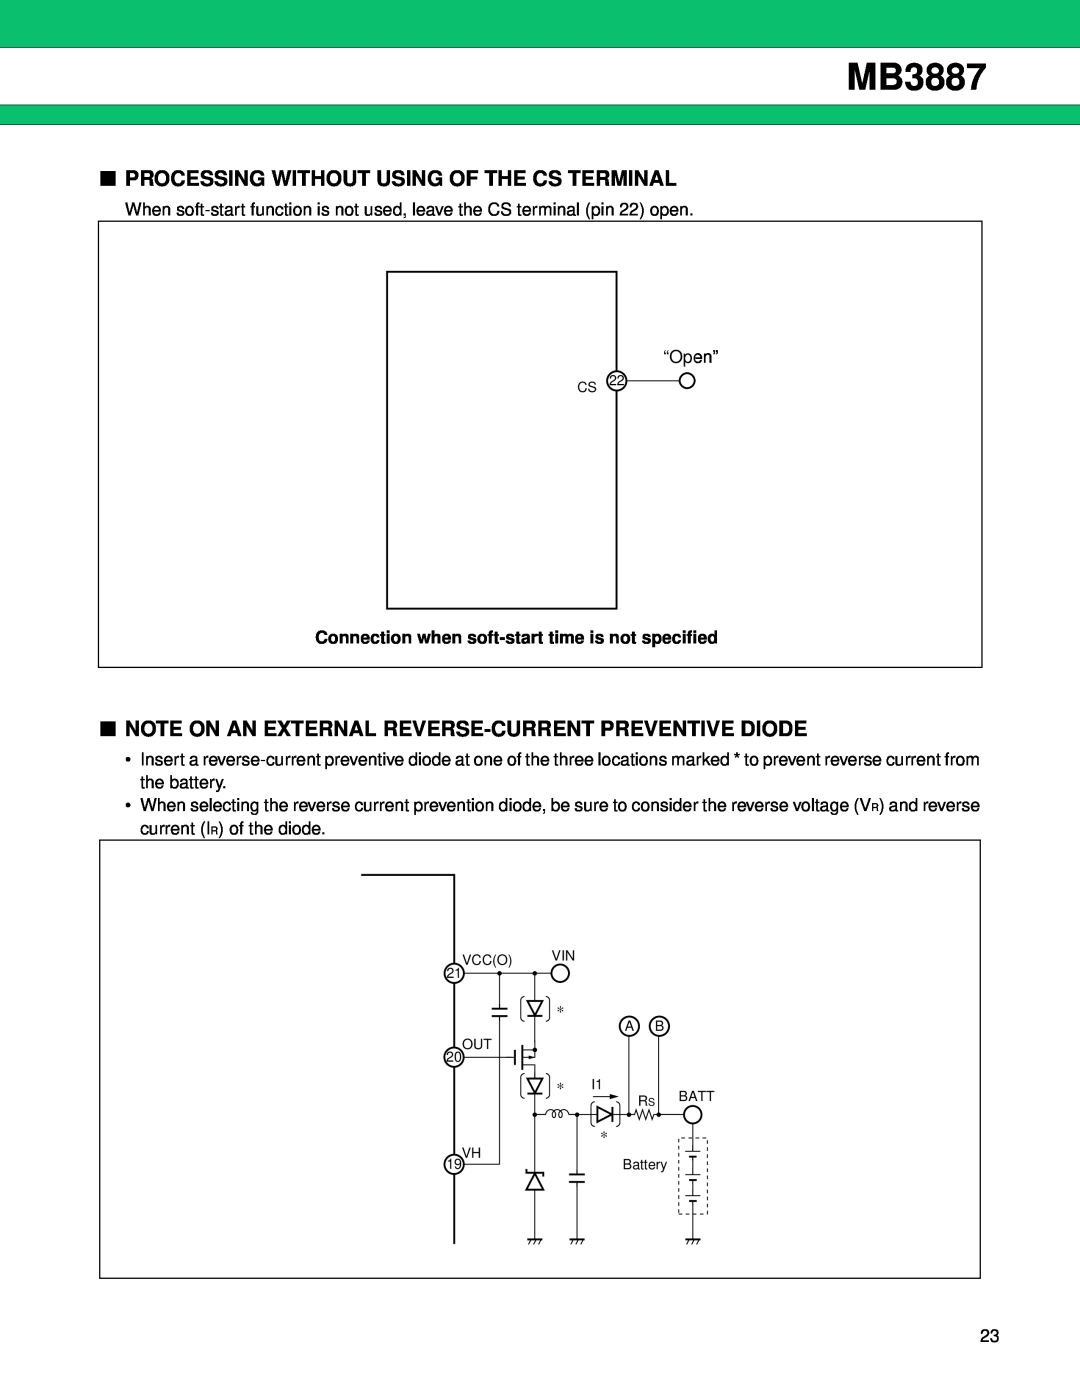 Fujitsu MB3887 manual Processing Without Using Of The Cs Terminal, Note On An External Reverse-Current Preventive Diode 